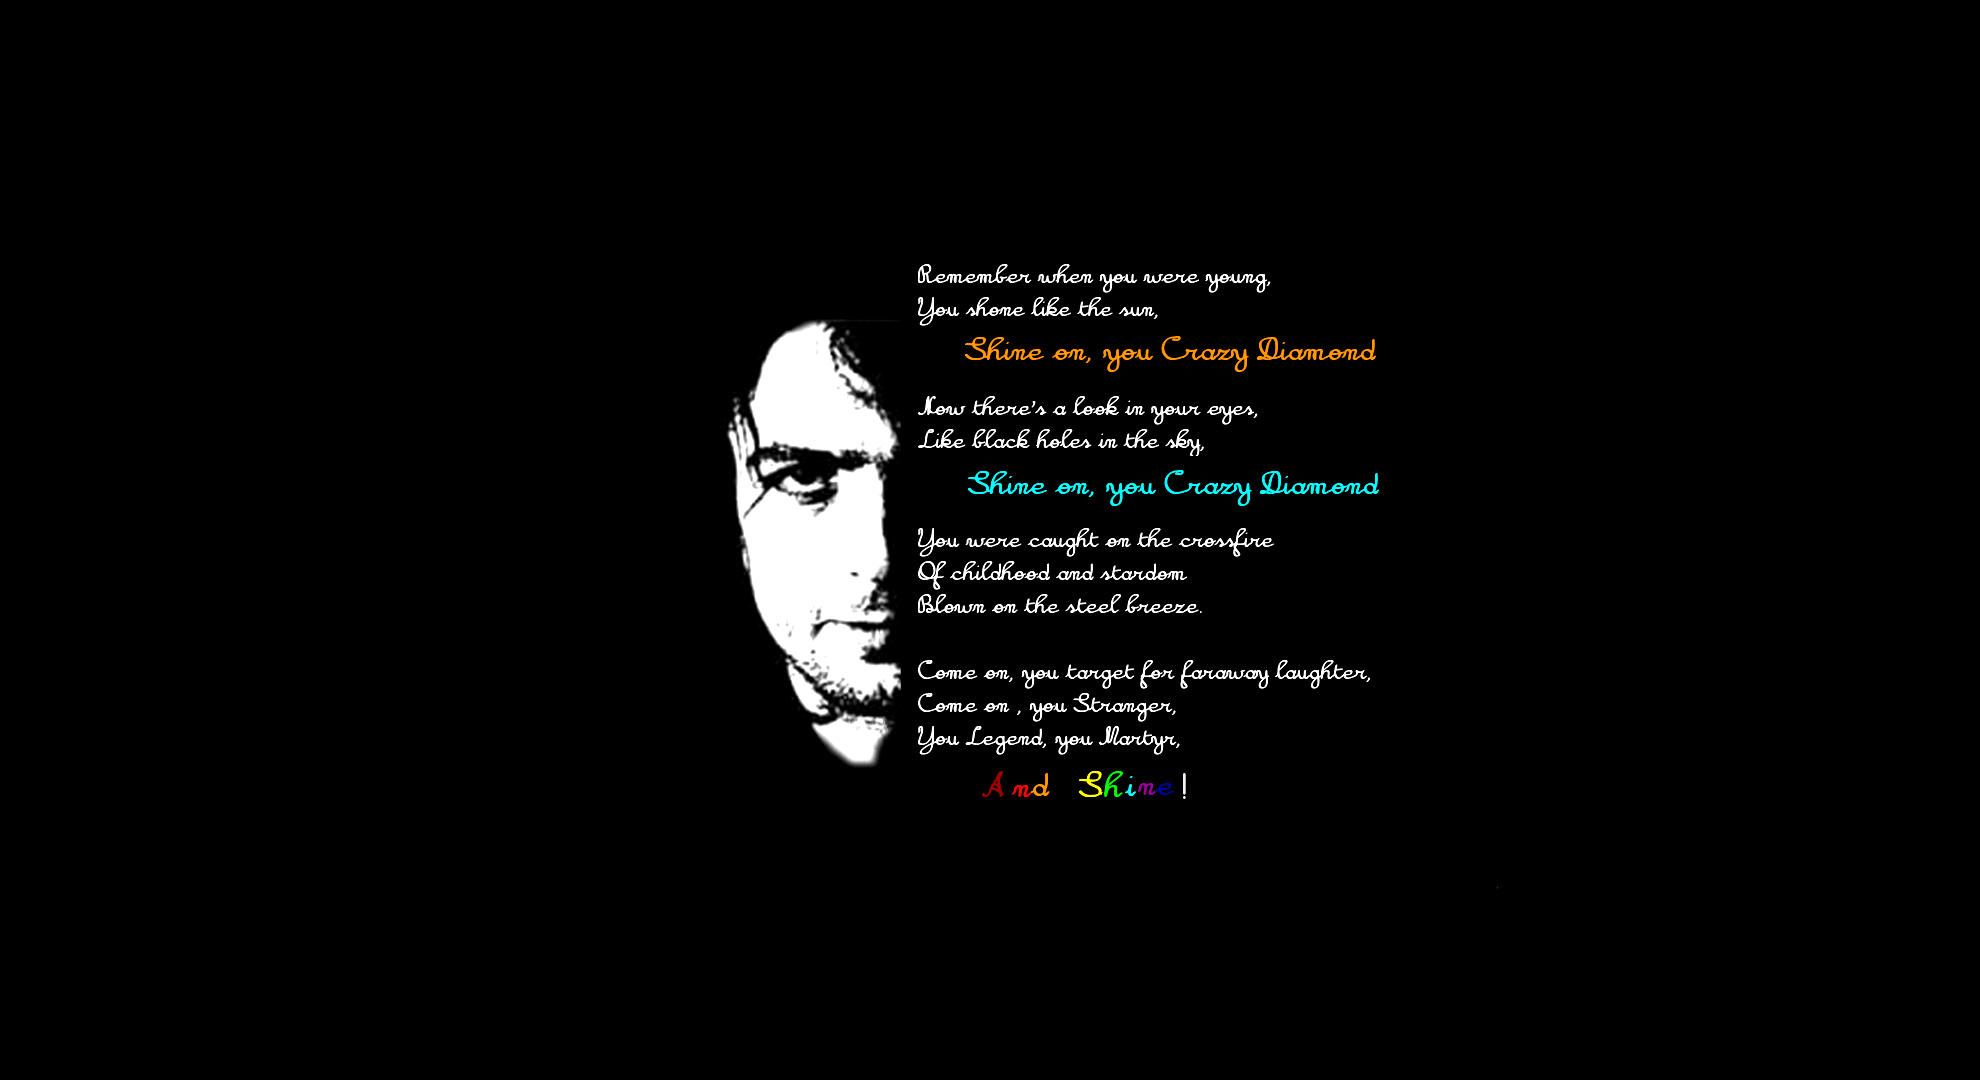 Pink Floyd on you Crazy Diamond Quote. Music wallpaper